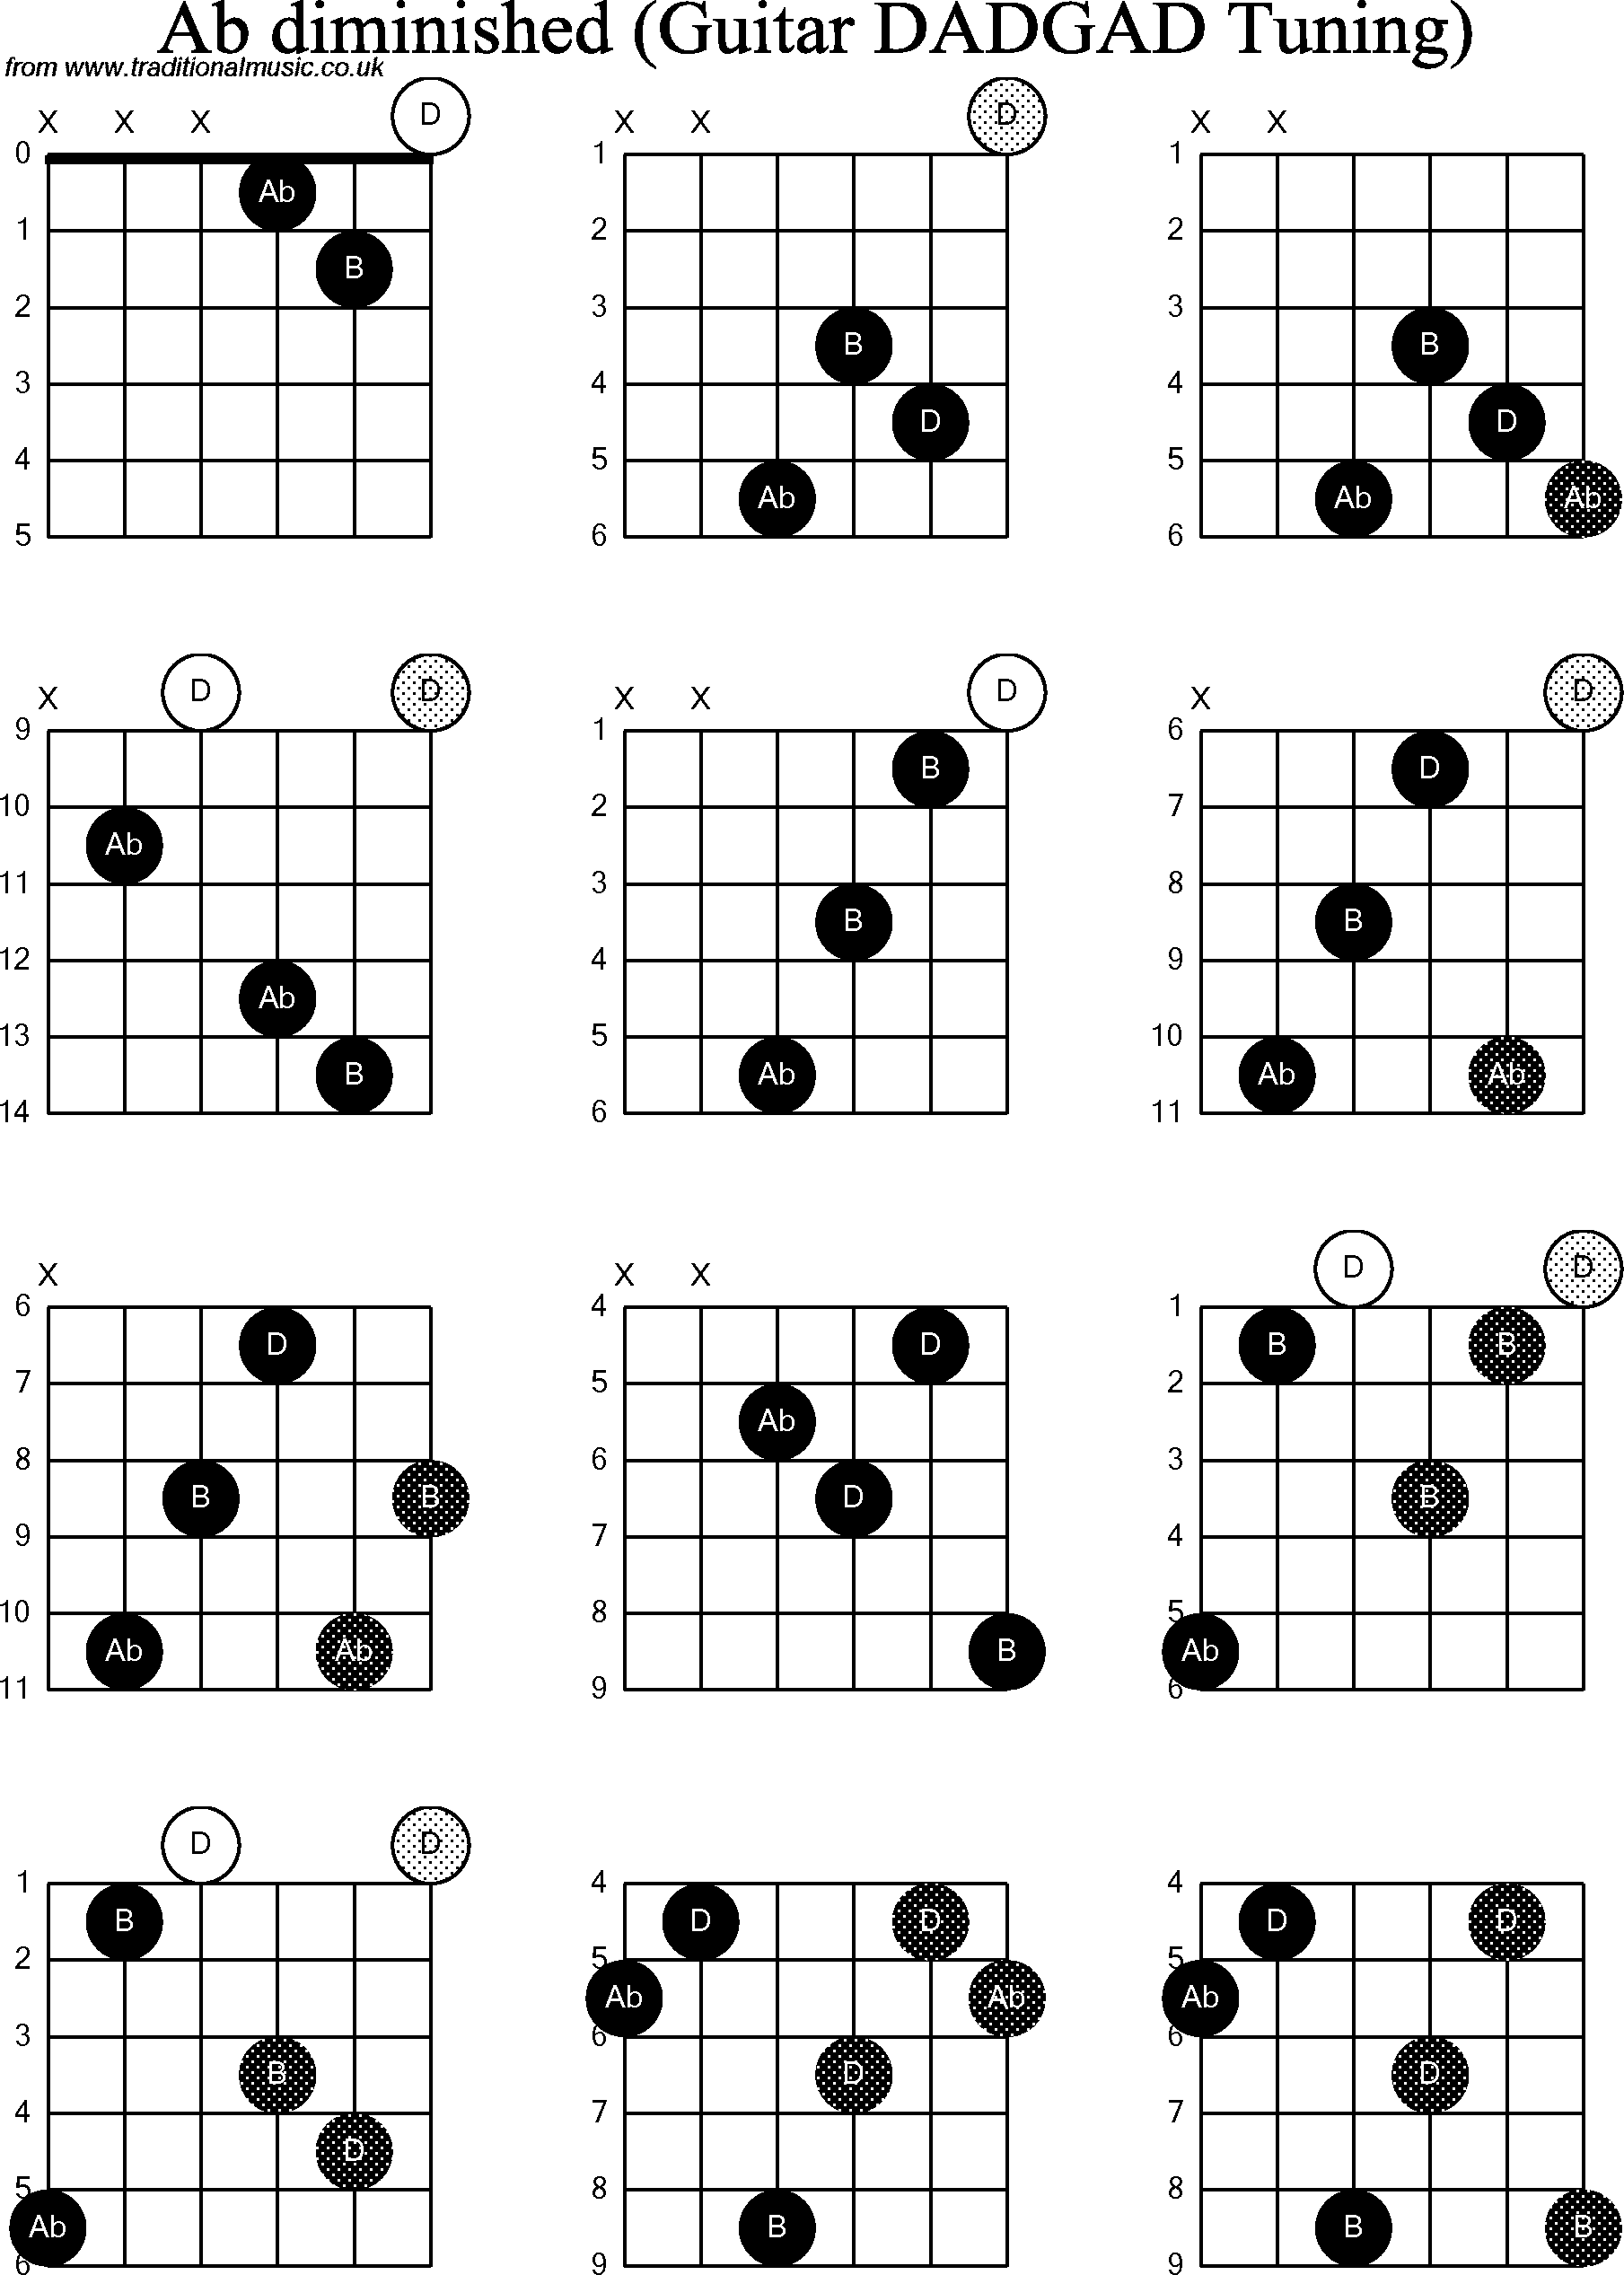 Chord Diagrams for D Modal Guitar(DADGAD), Ab Diminished